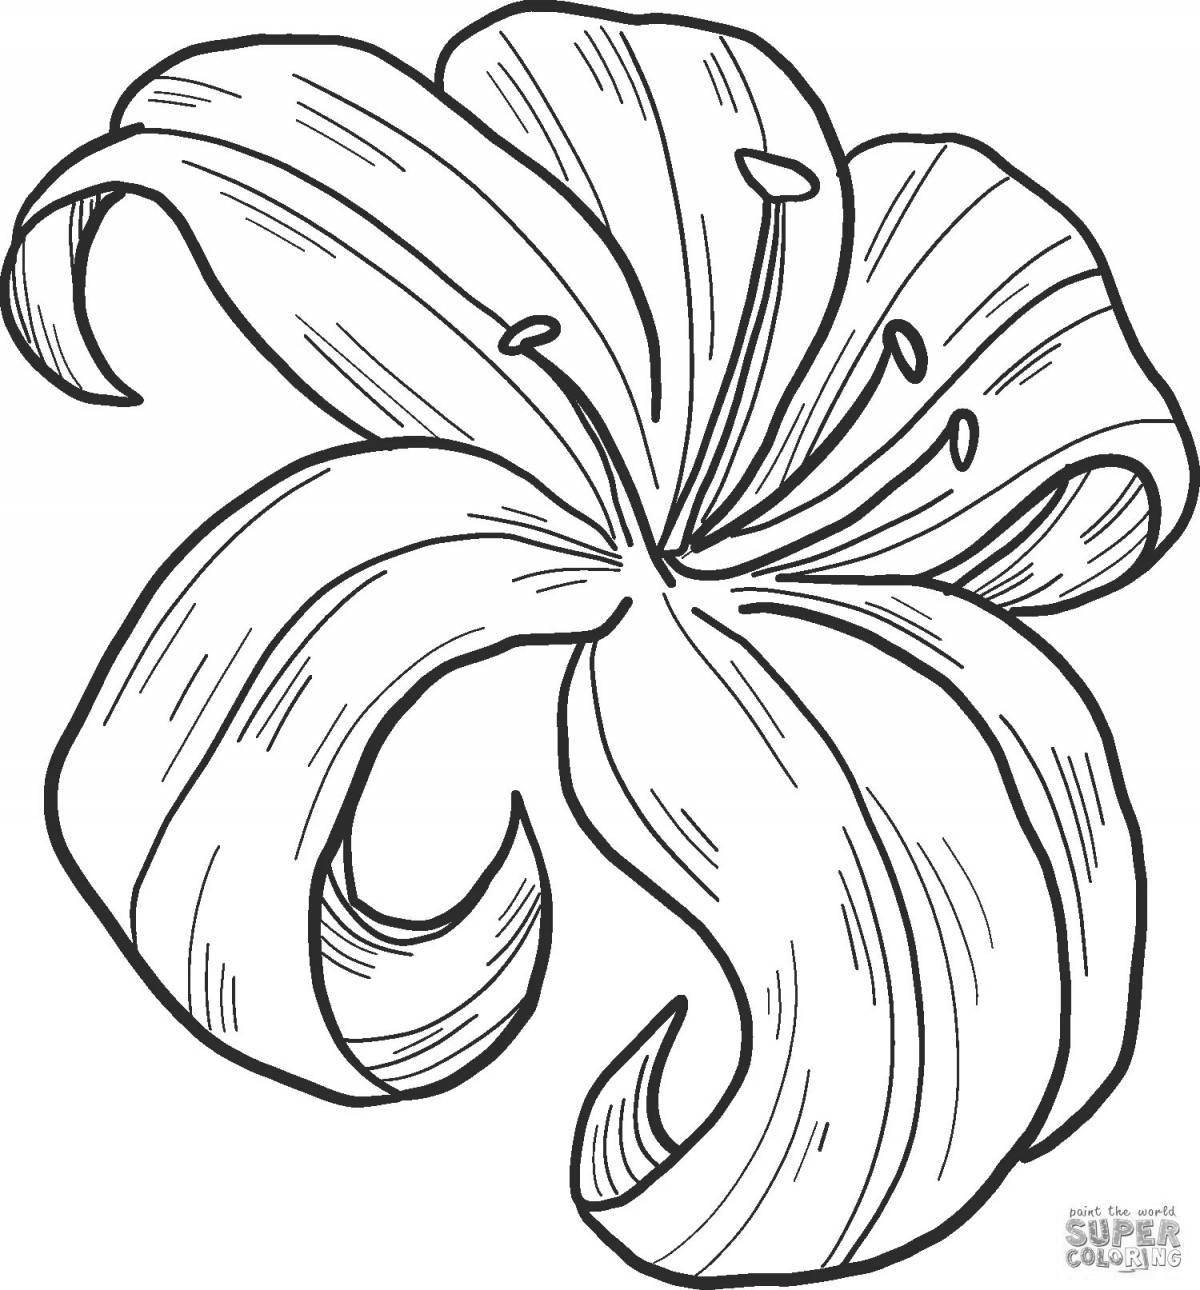 Fun lily coloring for kids